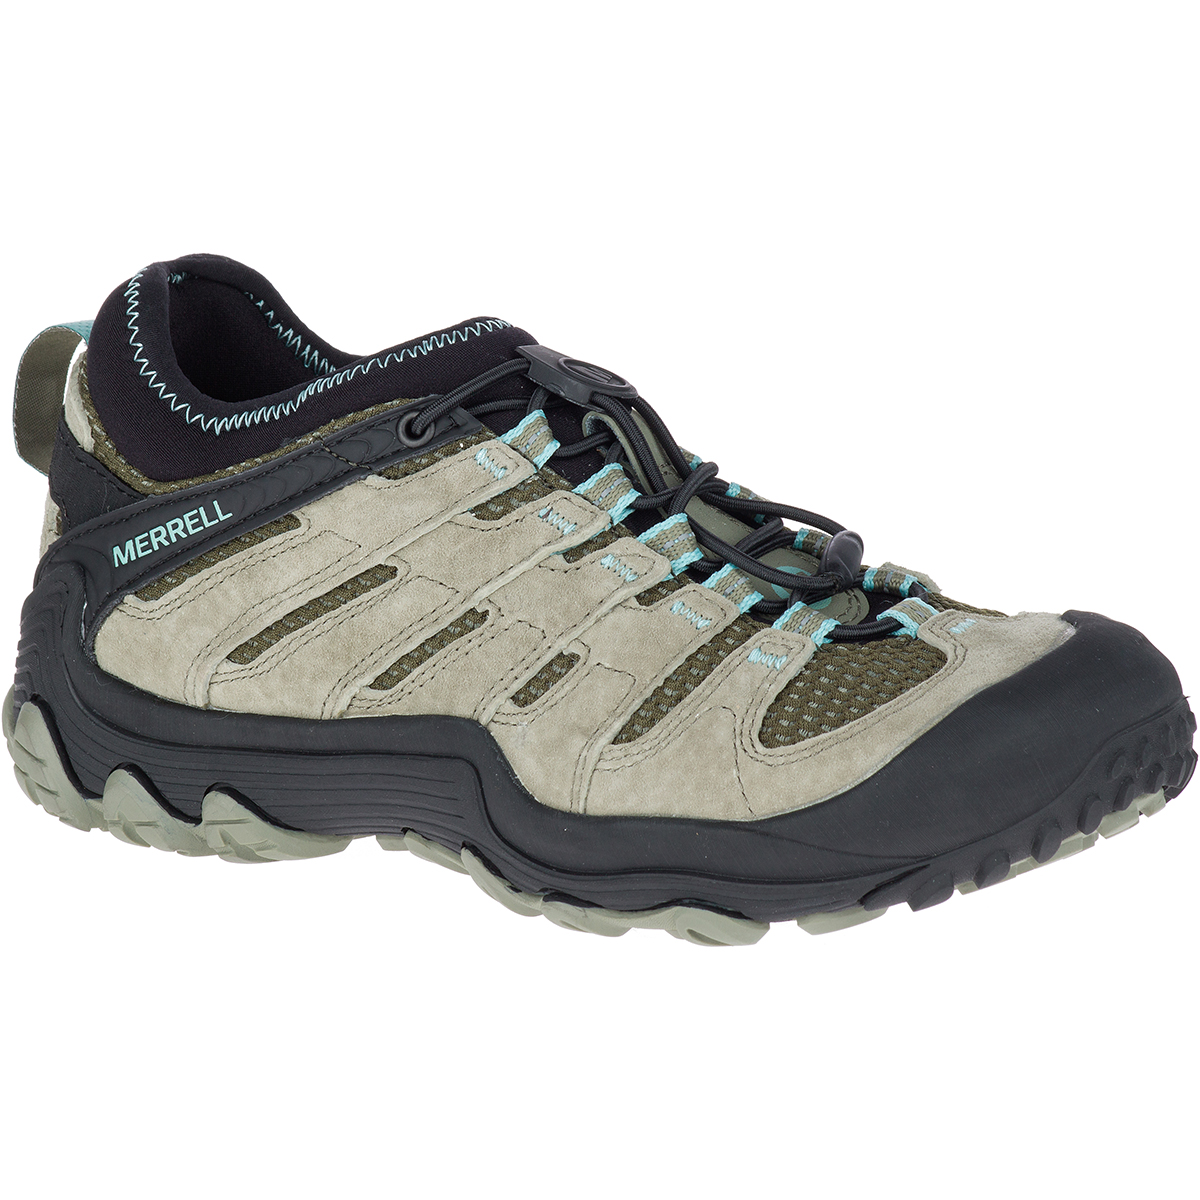 Merrell Women's Chameleon 7 Limit Stretch Low Hiking Shoes, Dusty Olive